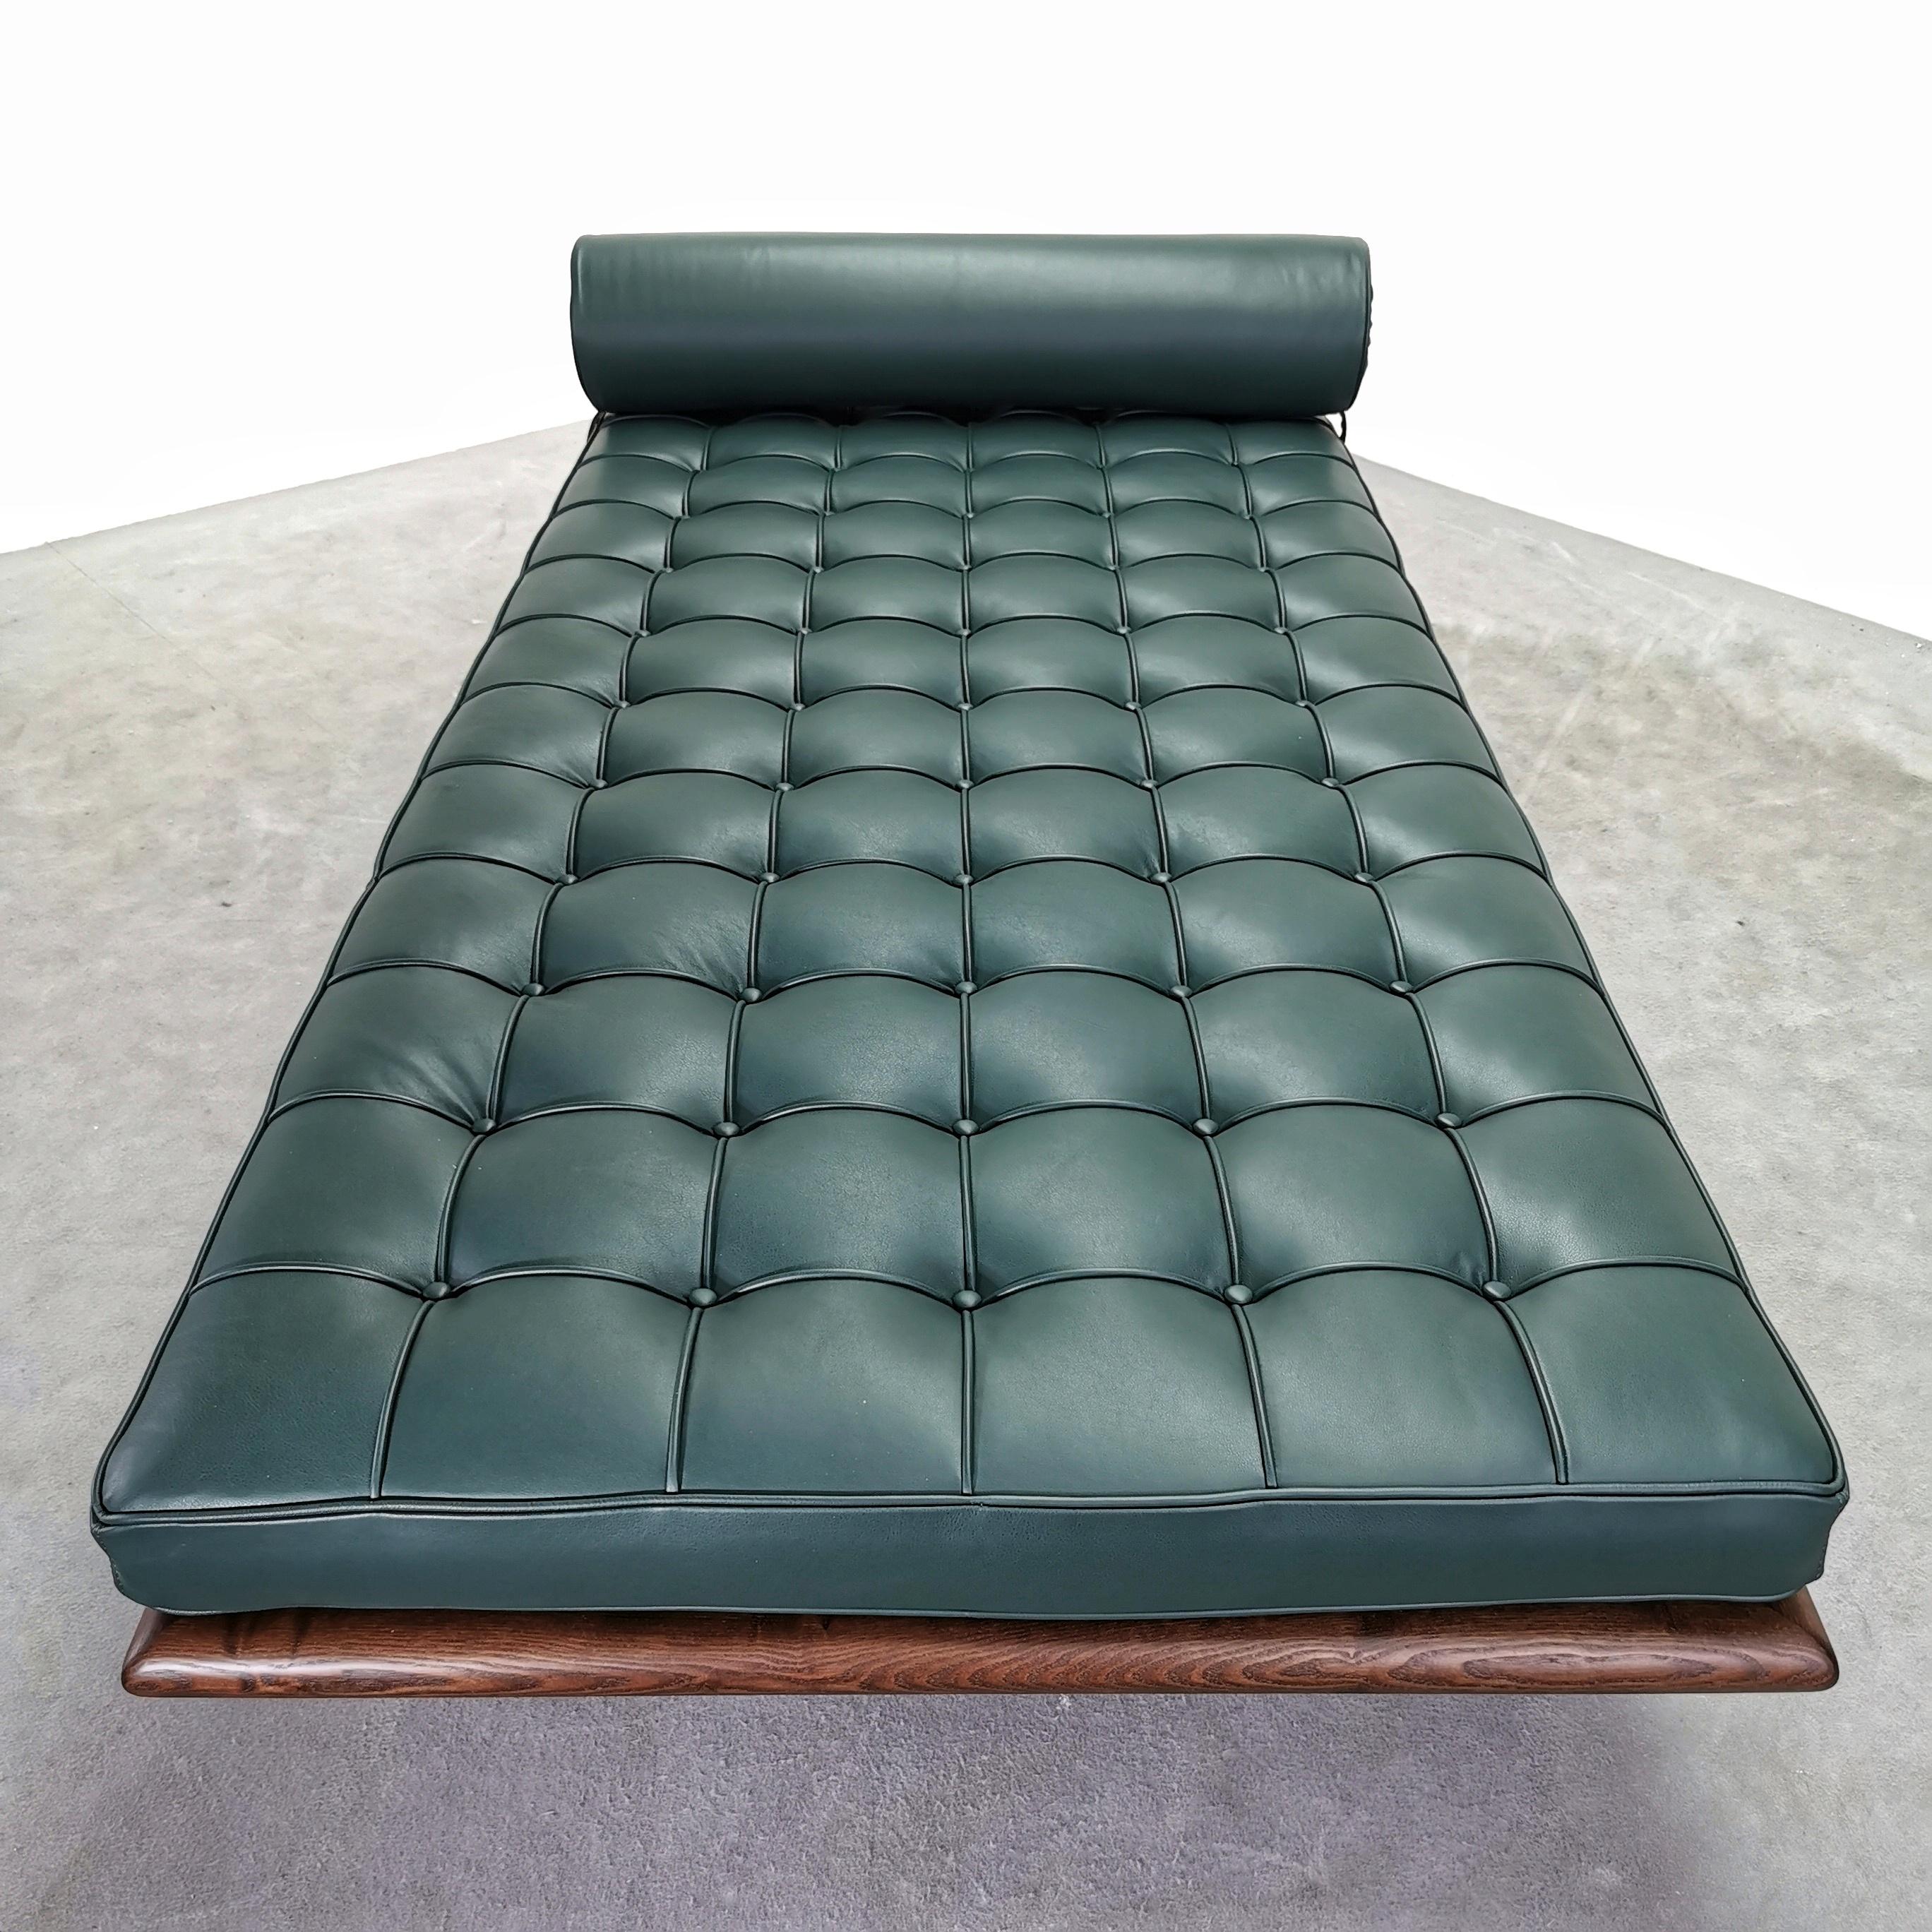 Contemporary Lettino daybed  Knoll International Bercelona Van der Rohe pelle verde For Sale